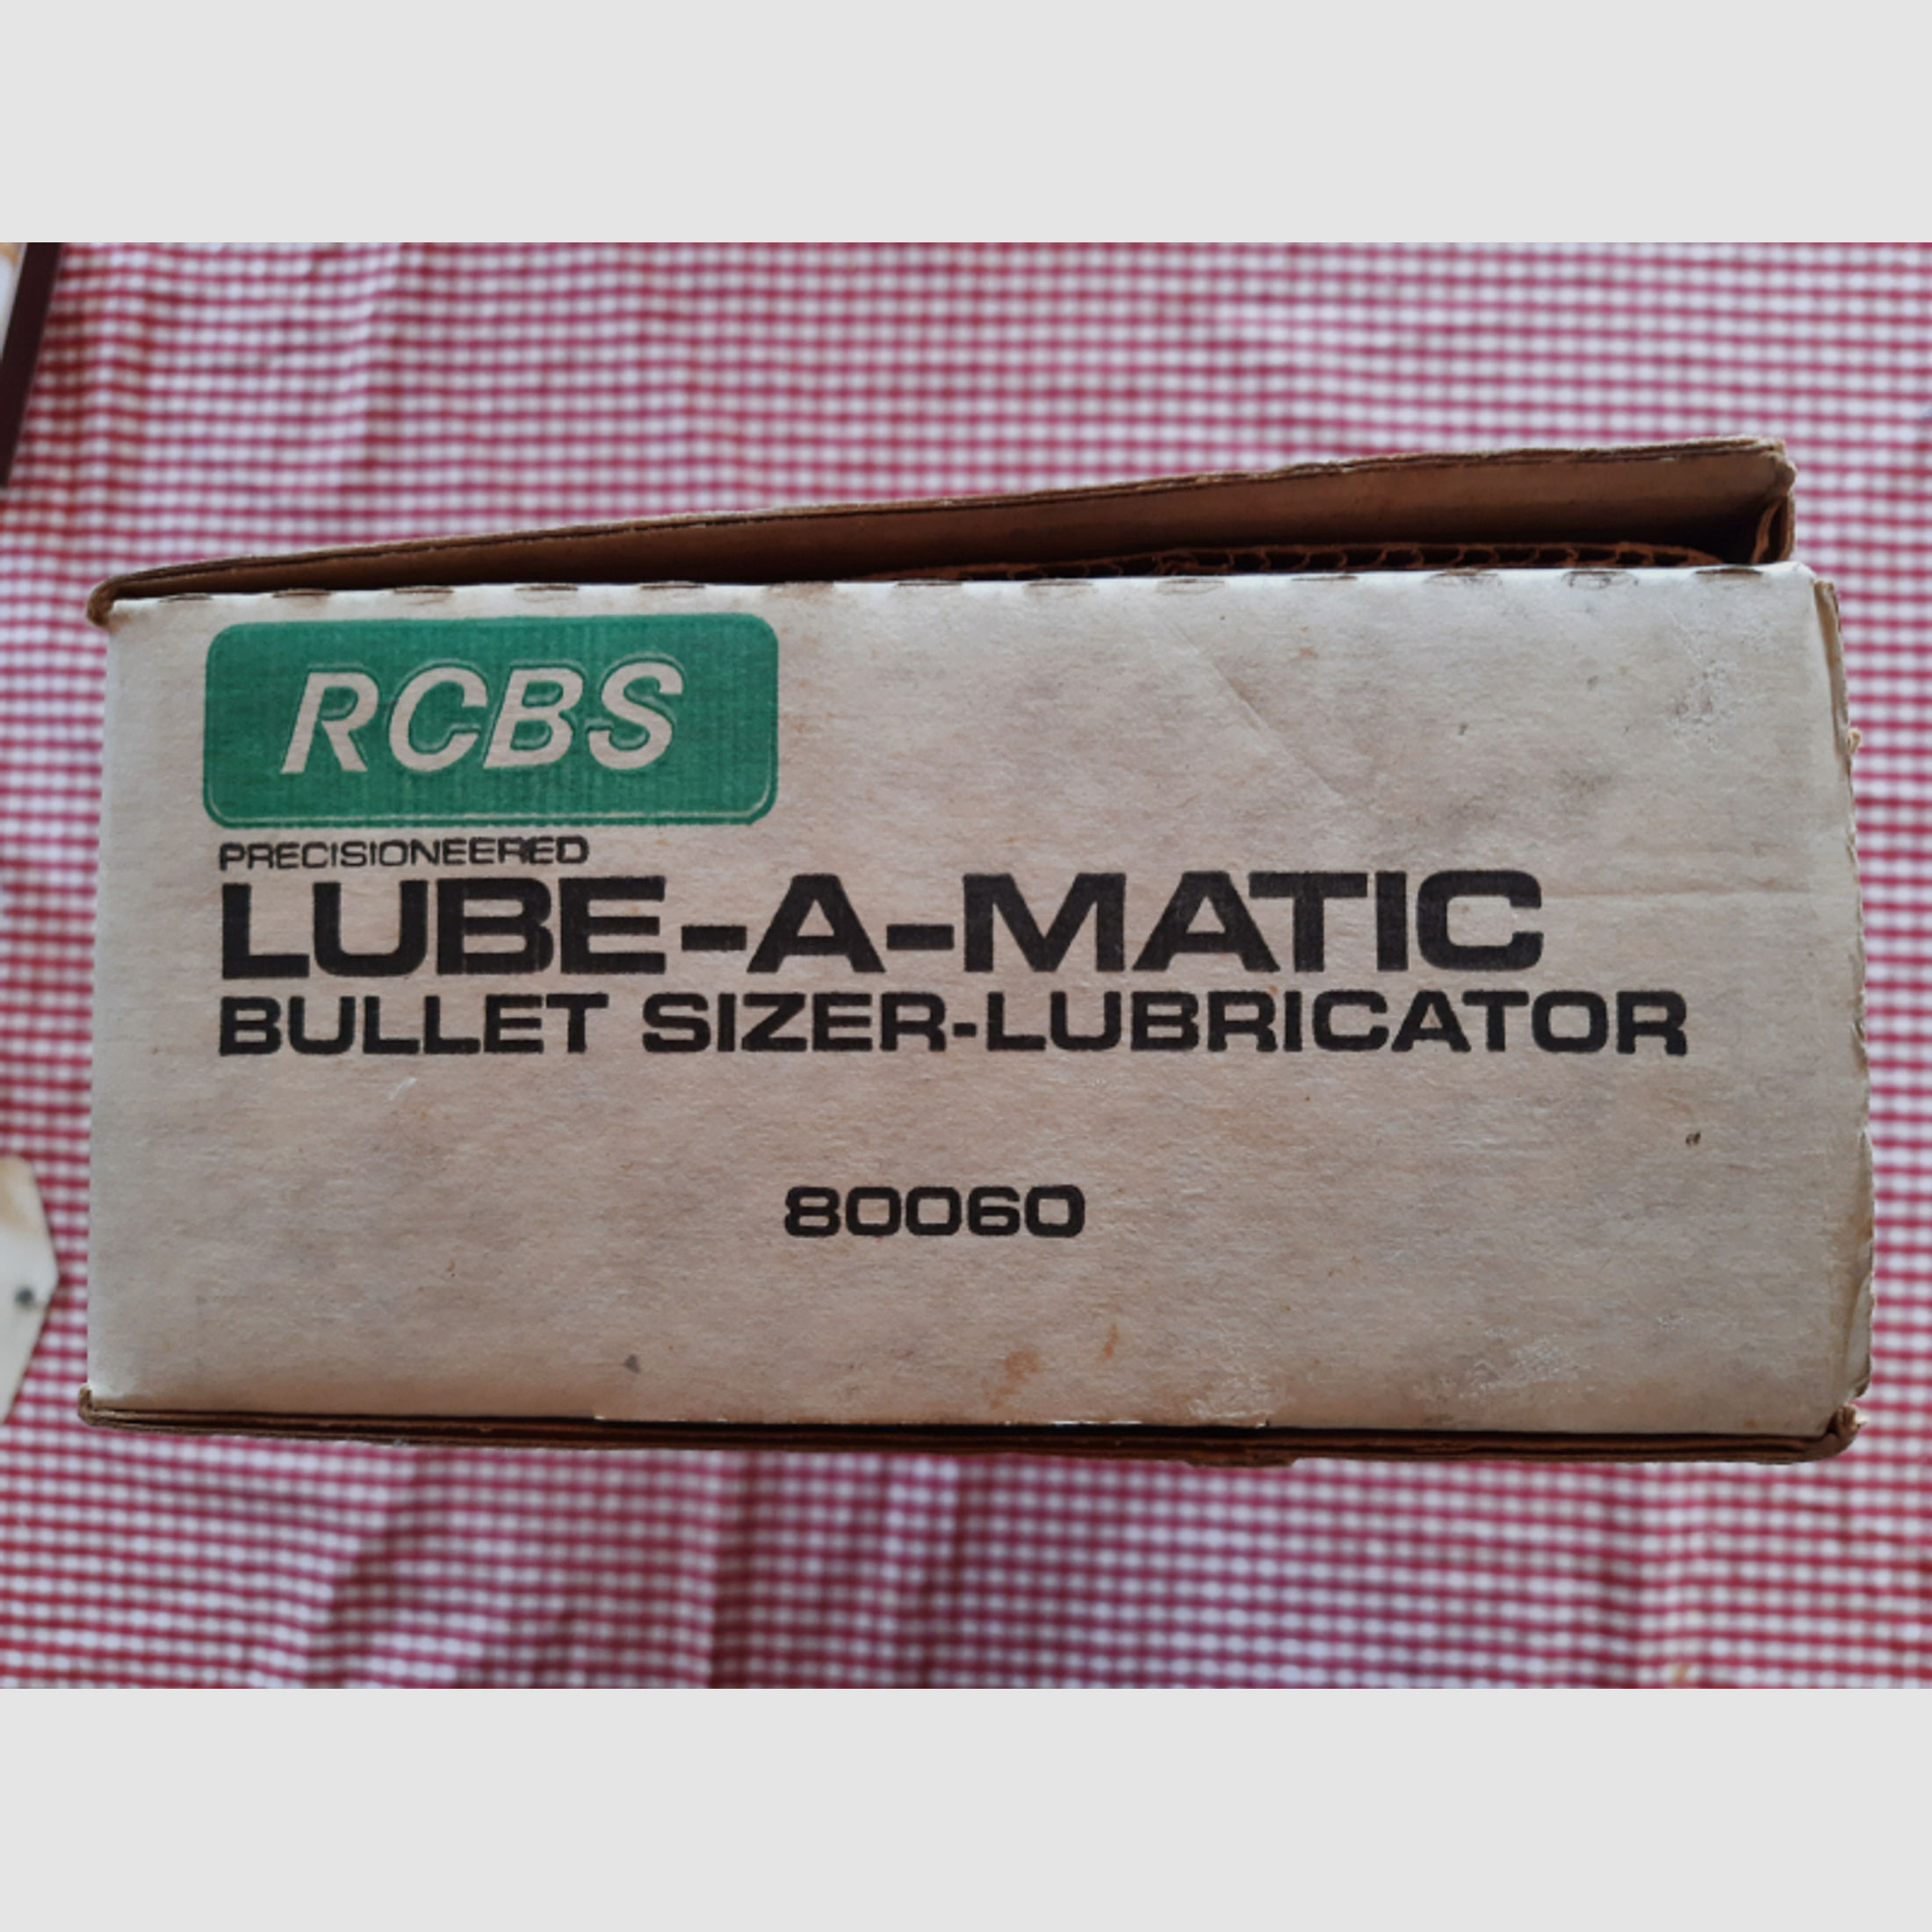 RCBS Lube-a-matic Bullet Sizer Lubricator 80060